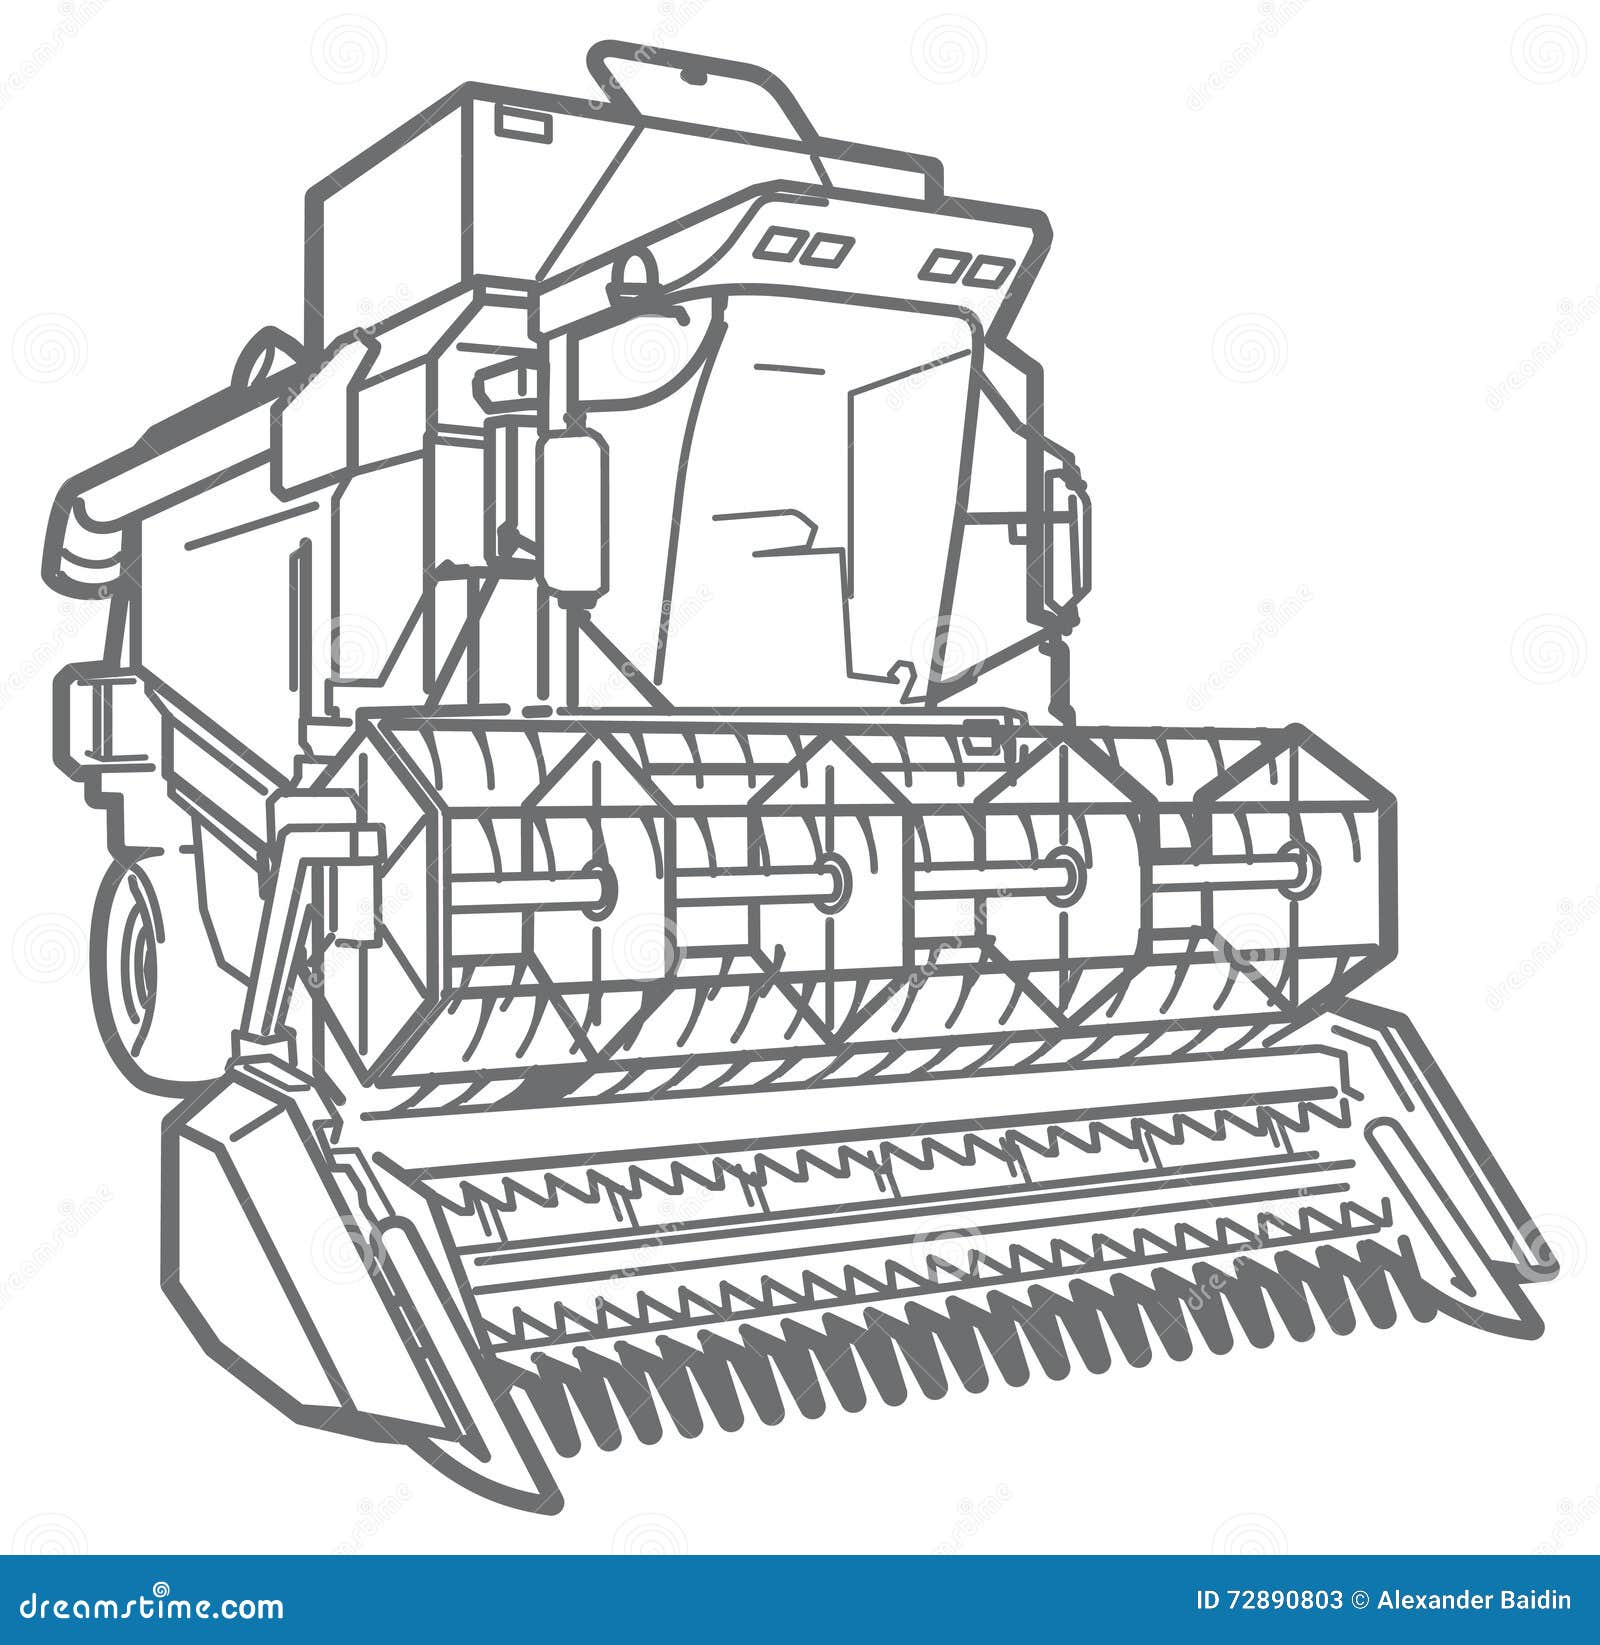 How to draw a Combine Harvester step by step - YouTube